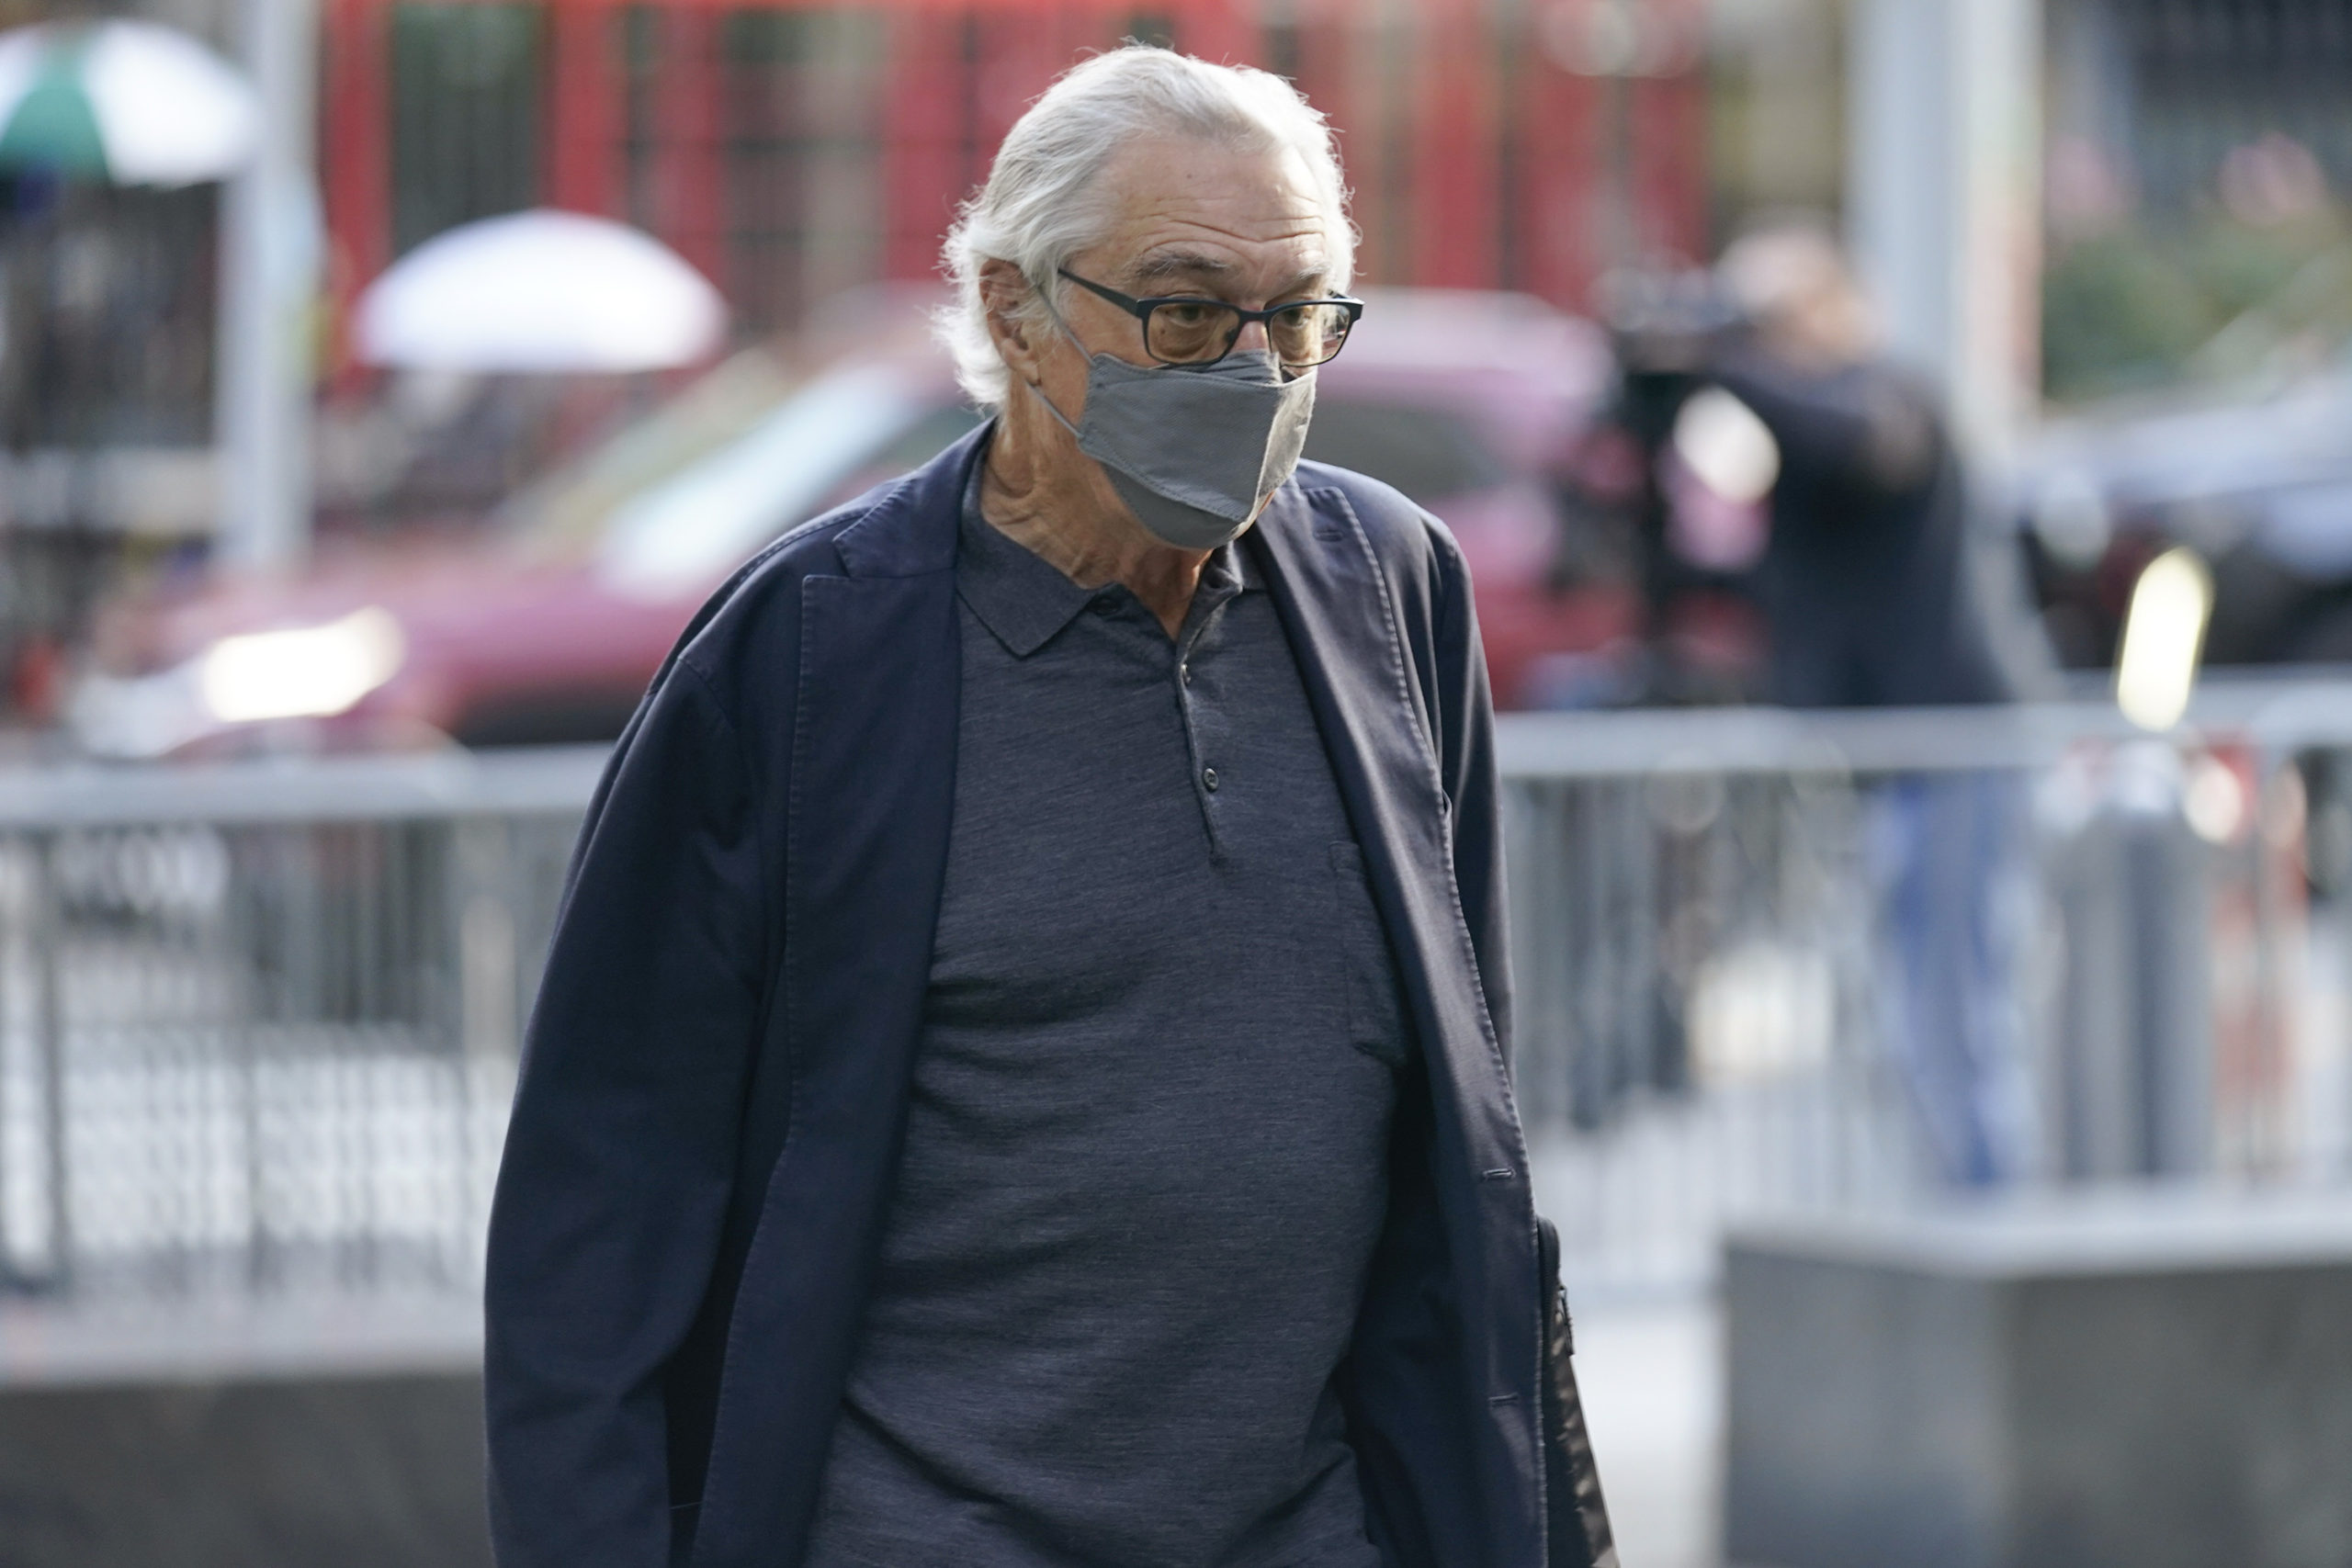 Actor Robert De Niro arrives to court in New York, Tuesday to continue his testimony in a $12 million lawsuit accusing him of being a bad boss.